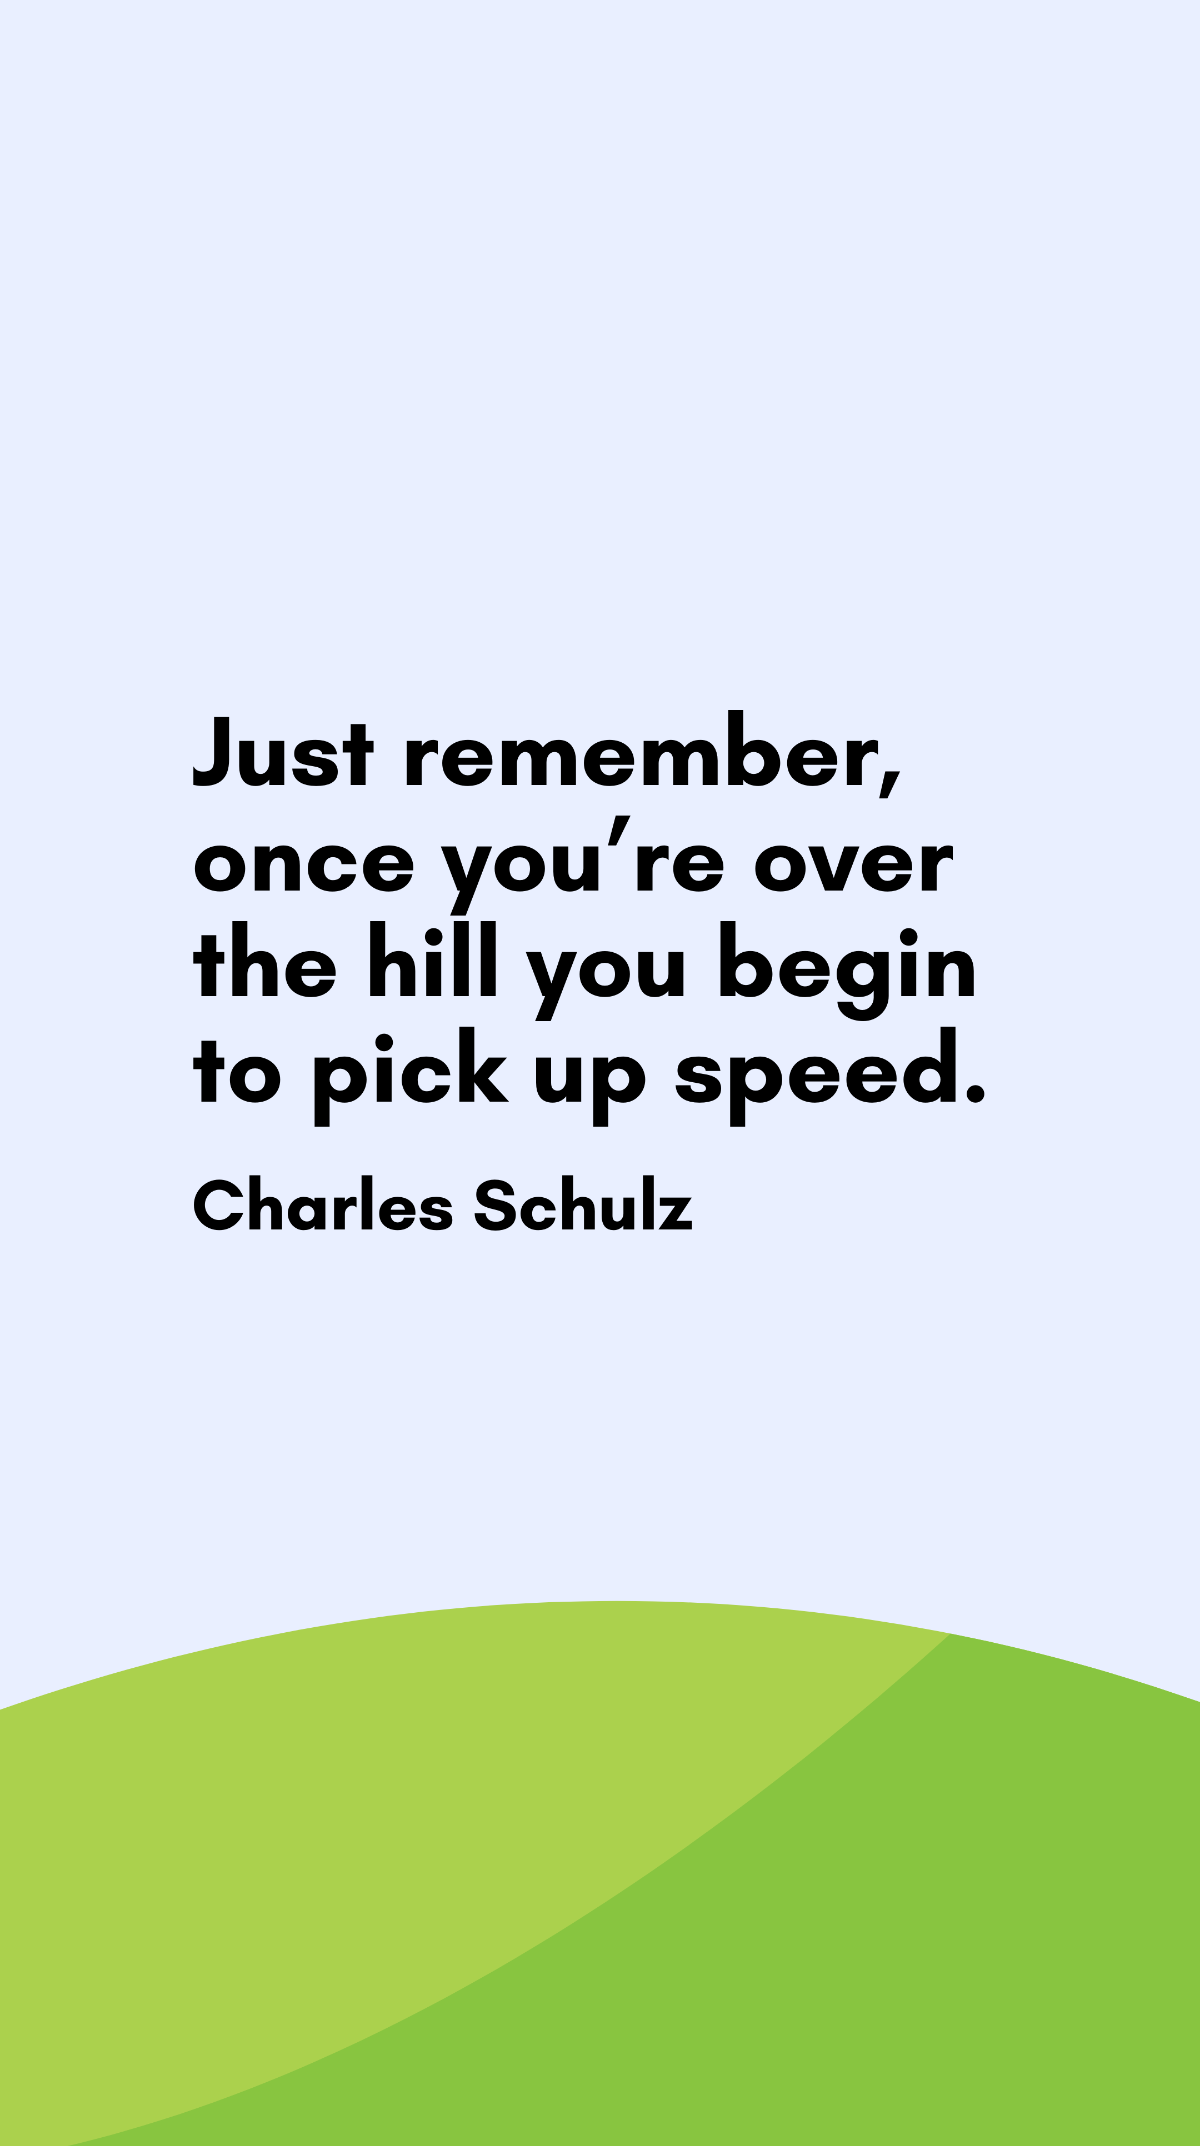 Charles Schulz - Just remember, once you’re over the hill you begin to pick up speed. Template